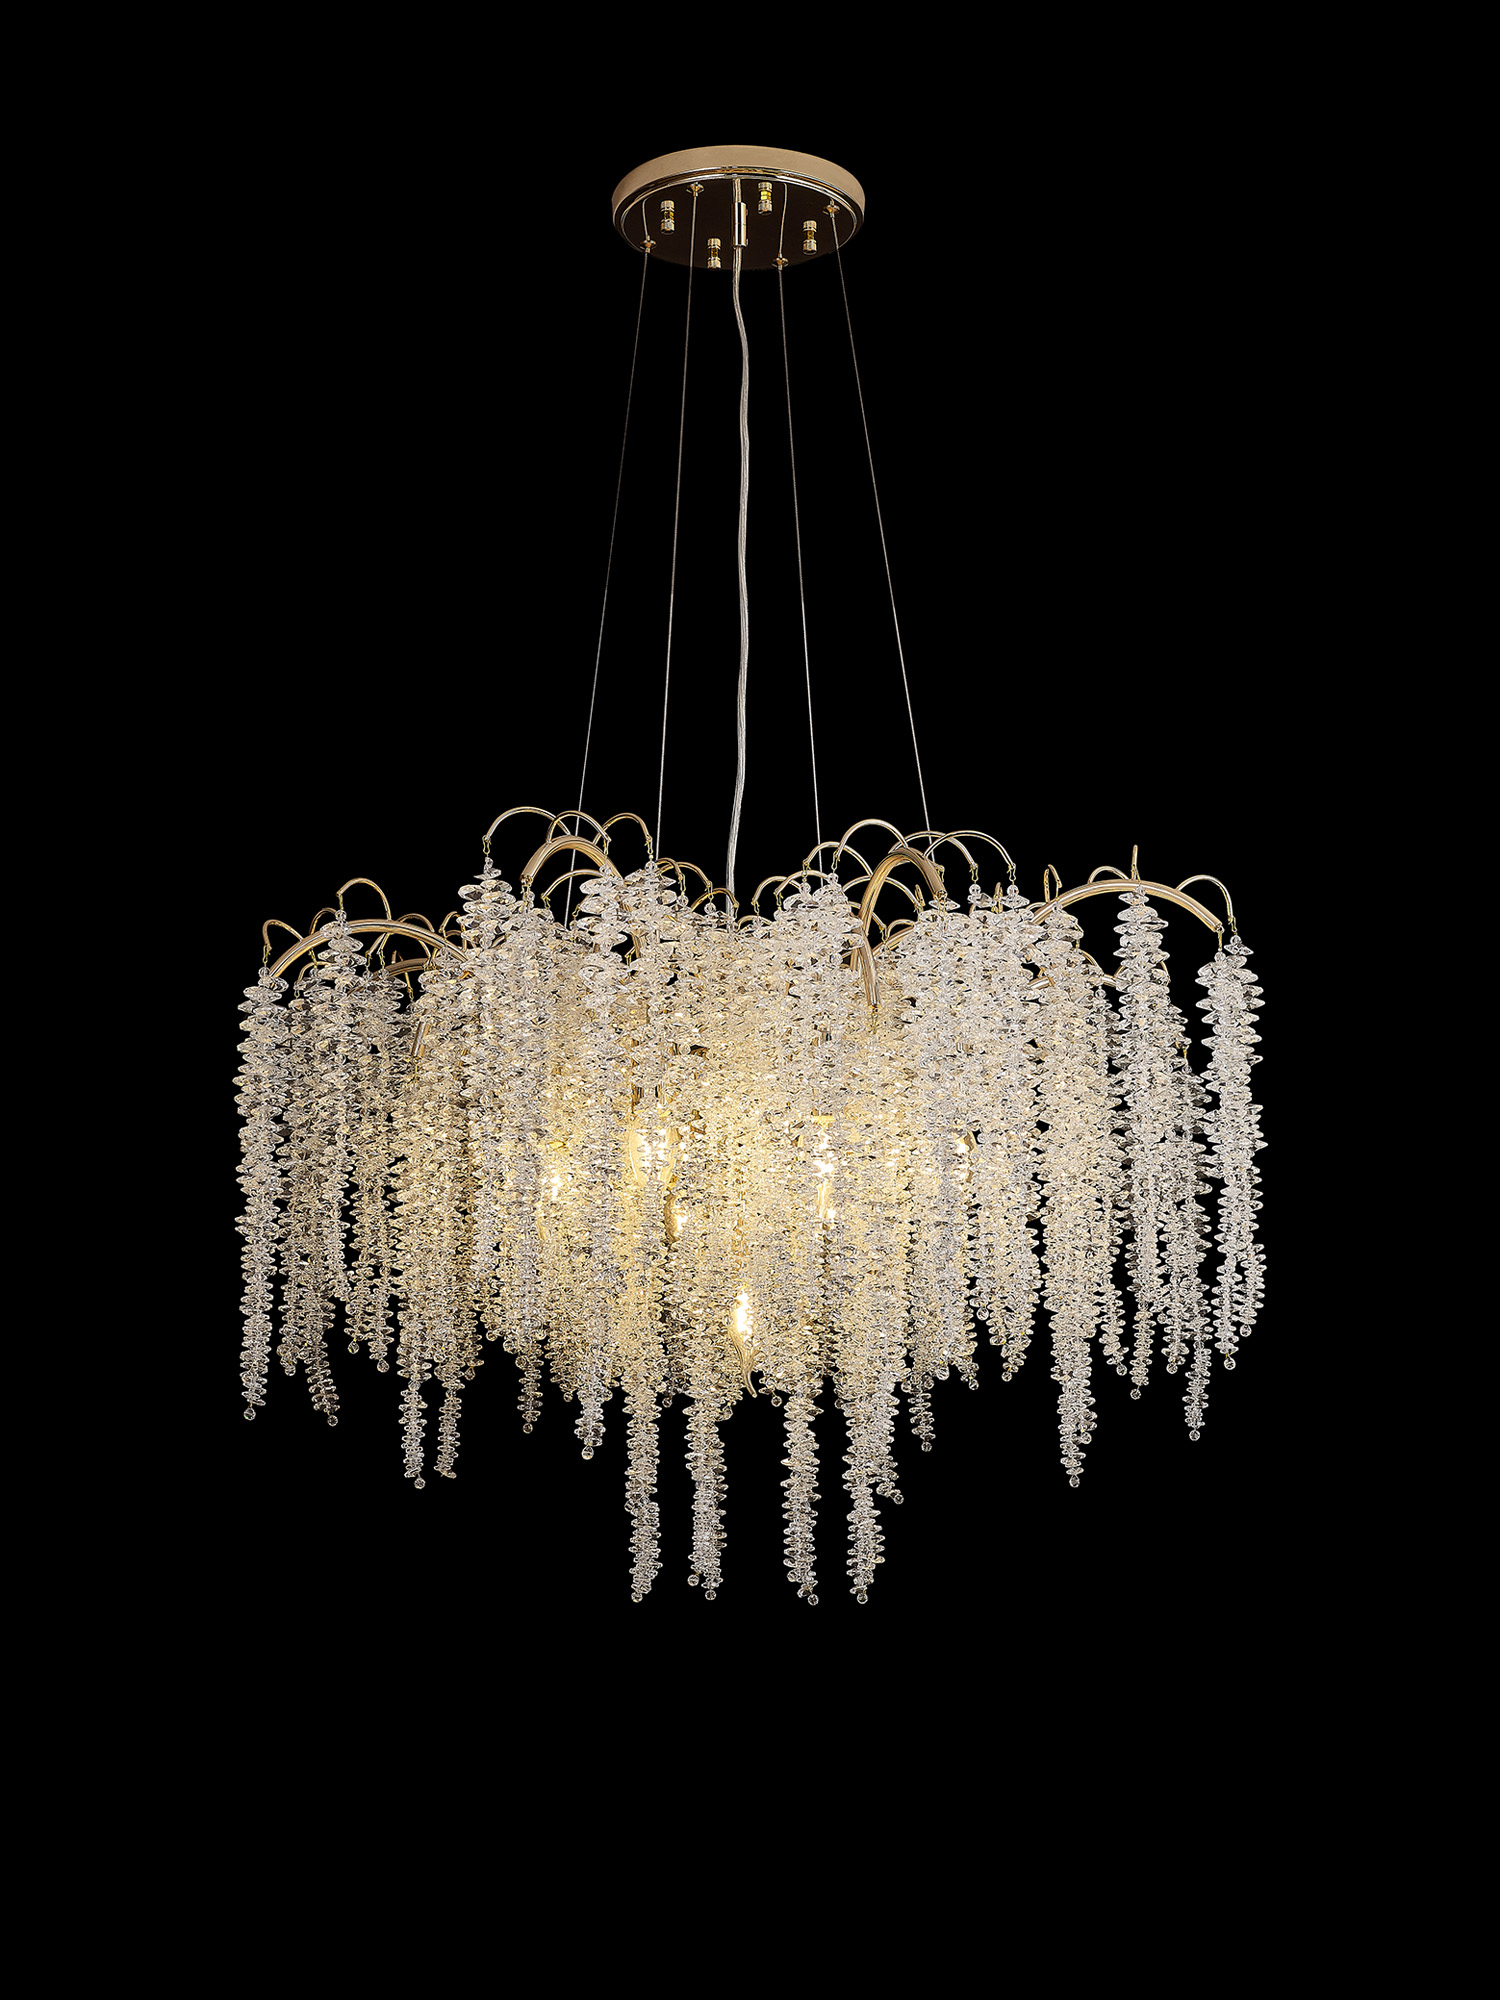 Wisteria French Gold Crystal Ceiling Lights Diyas Multi Arm Crystal Fittings